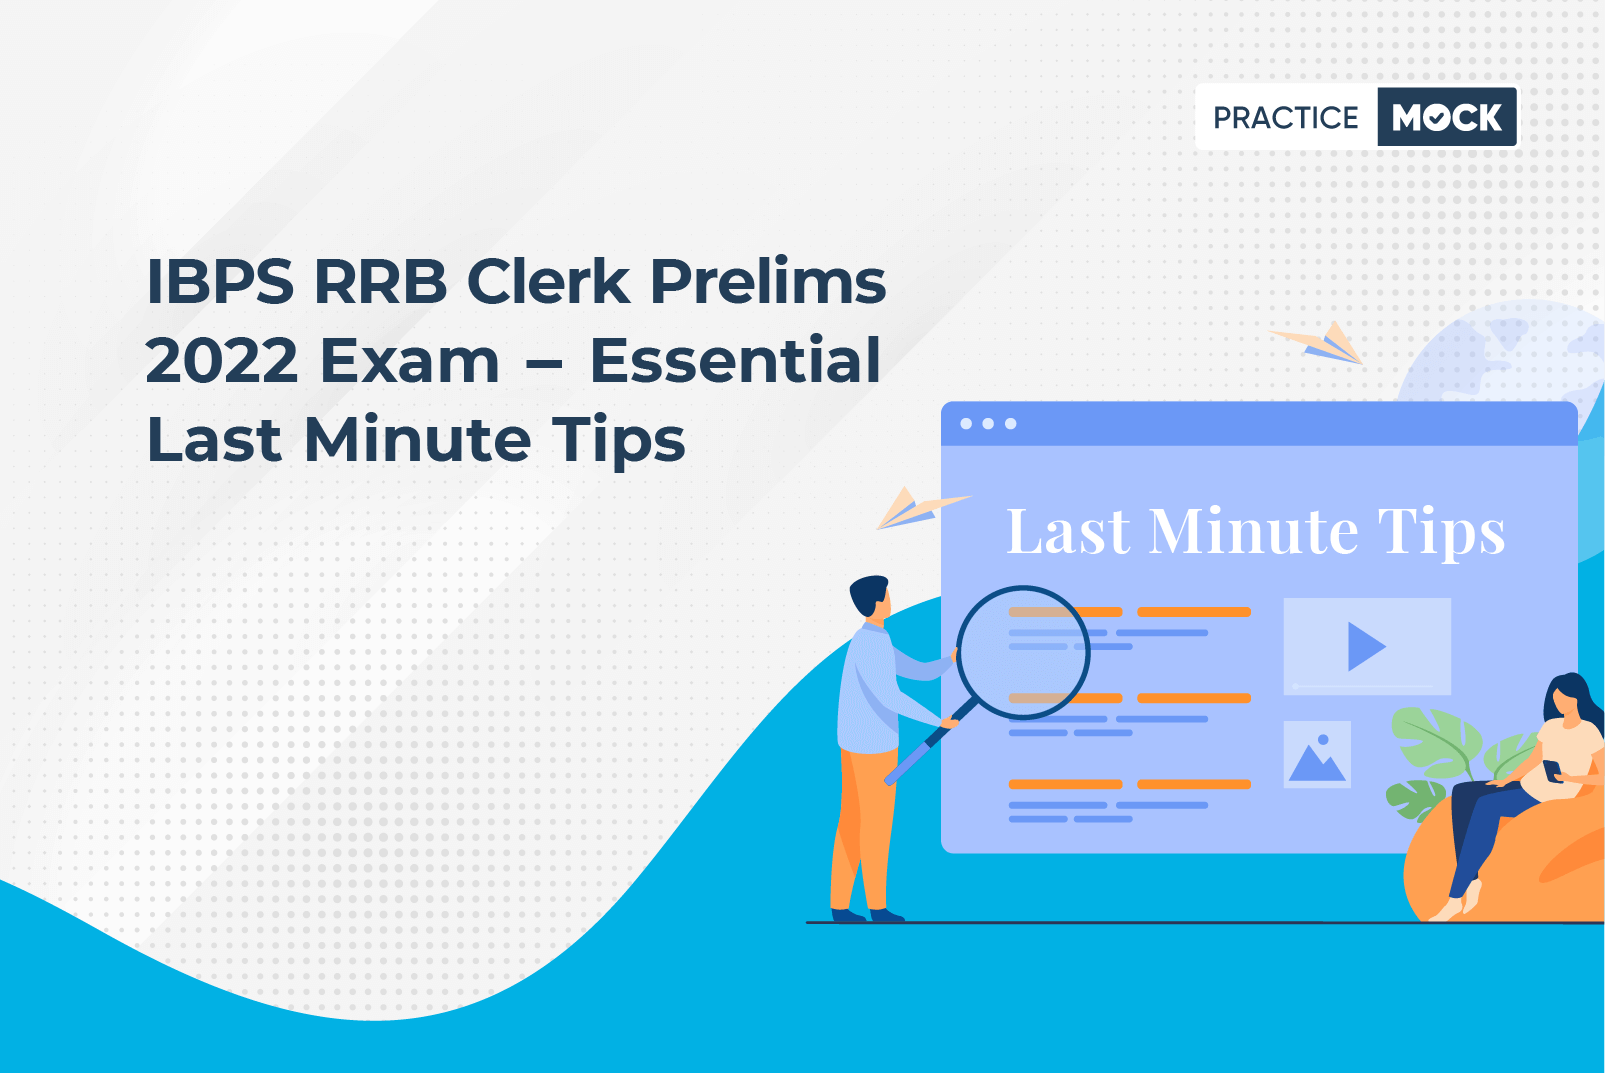 Last Minute Tips for IBPS RRB Clerk Prelims 2022